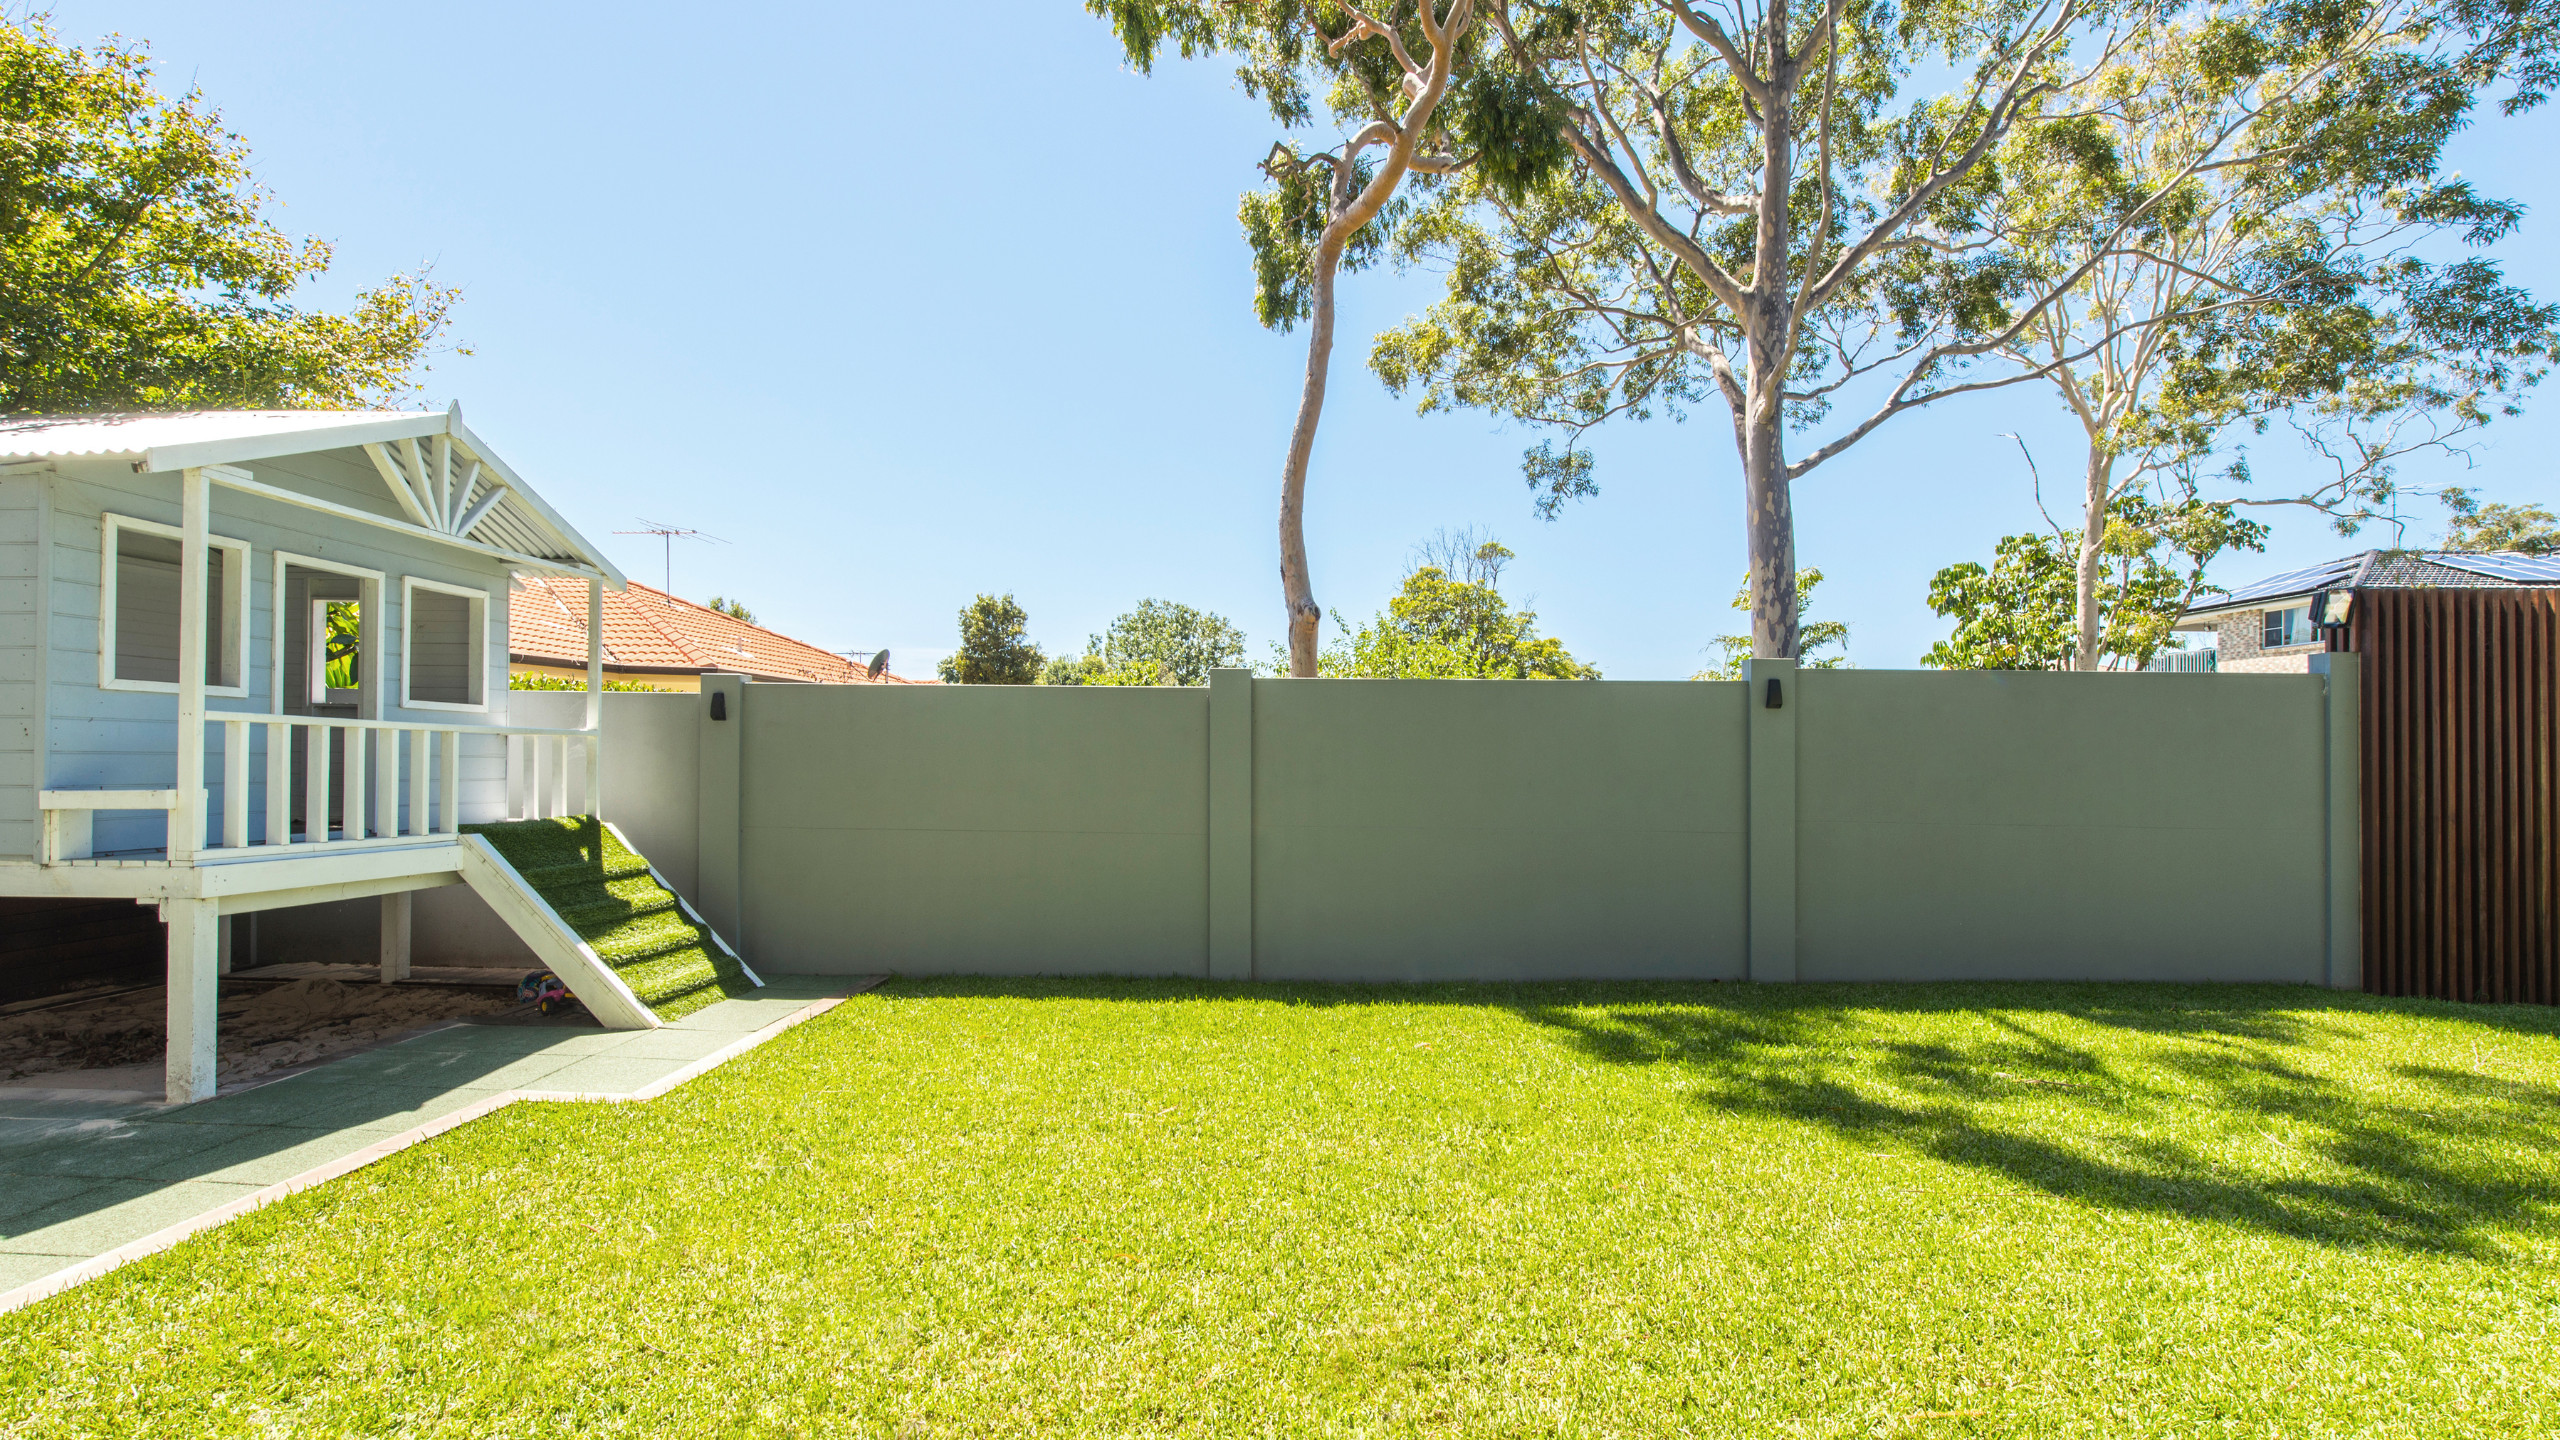 Acoustic dividing fence for duplex development boosts property value and privacy